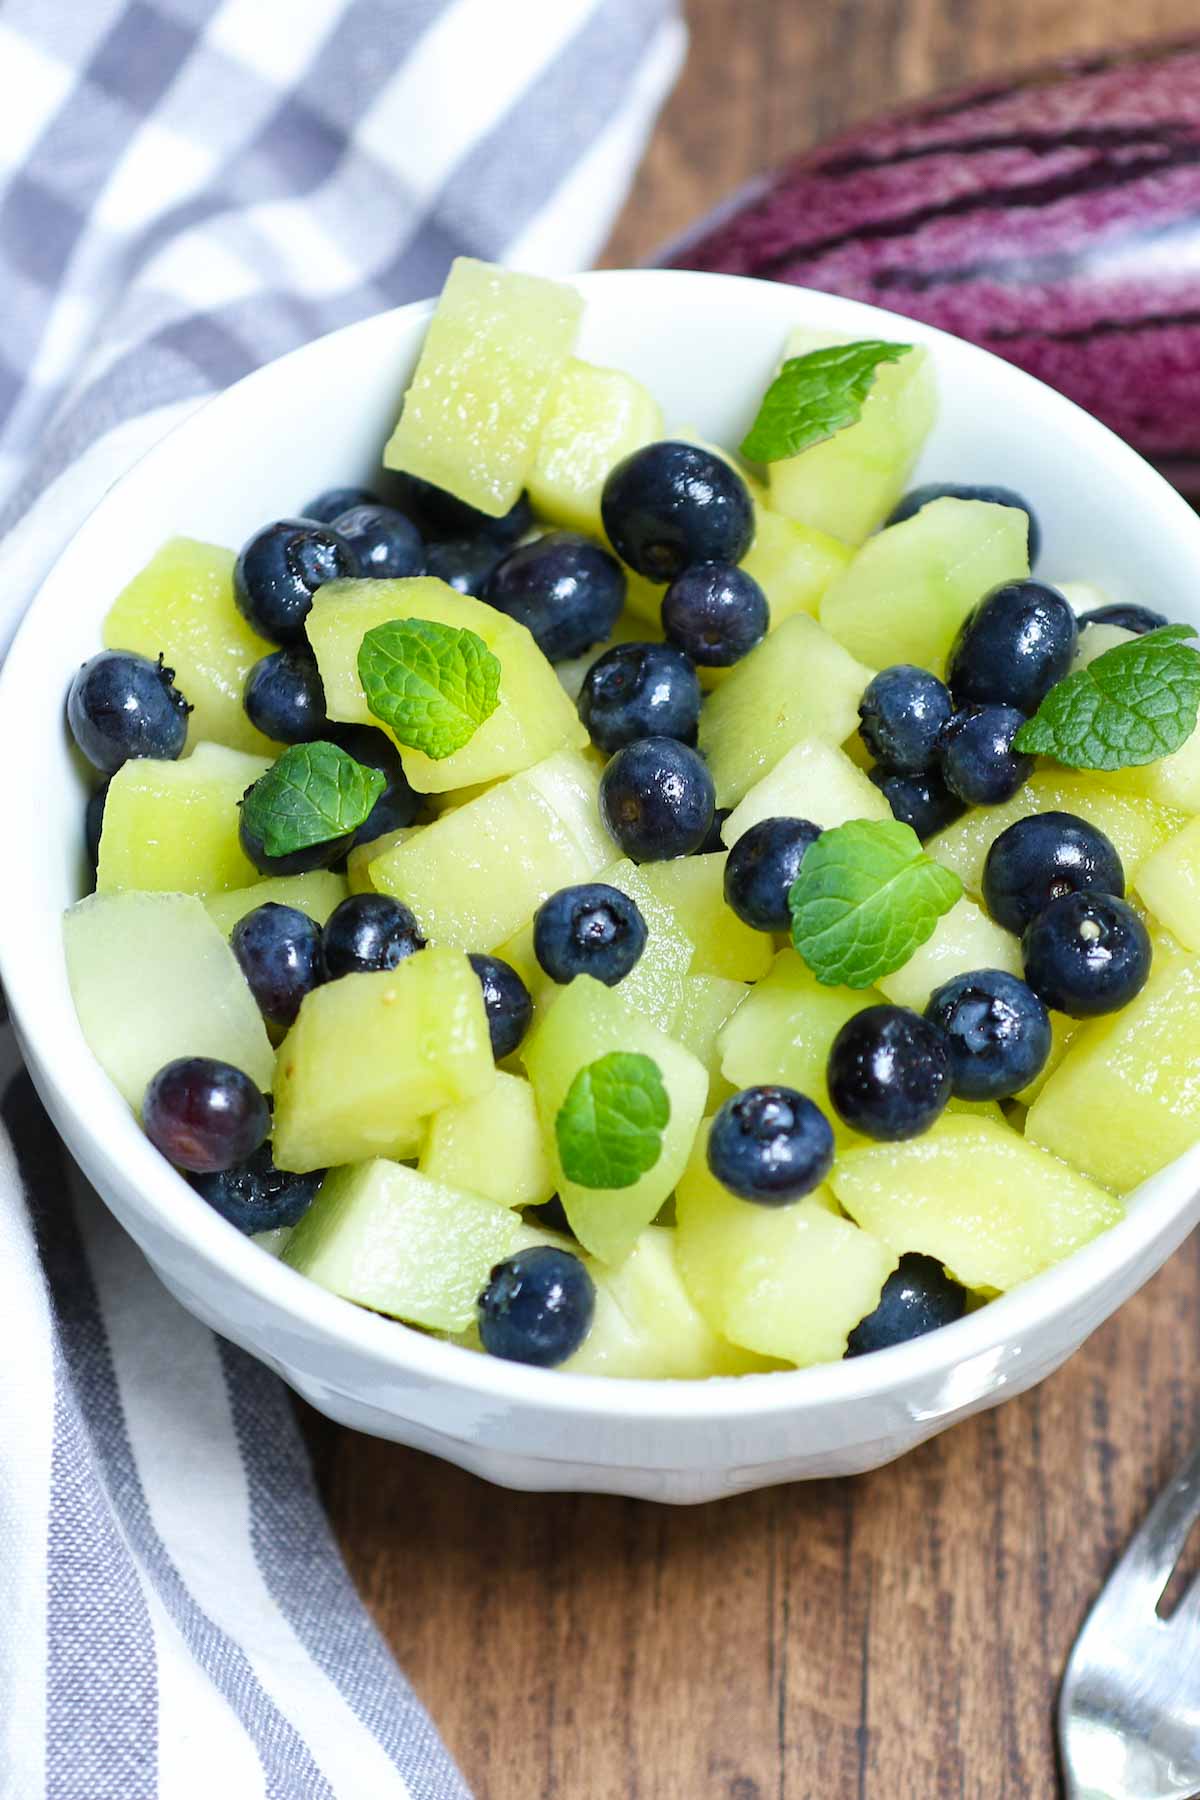 Combining chunks of pepino dulce with other fruits